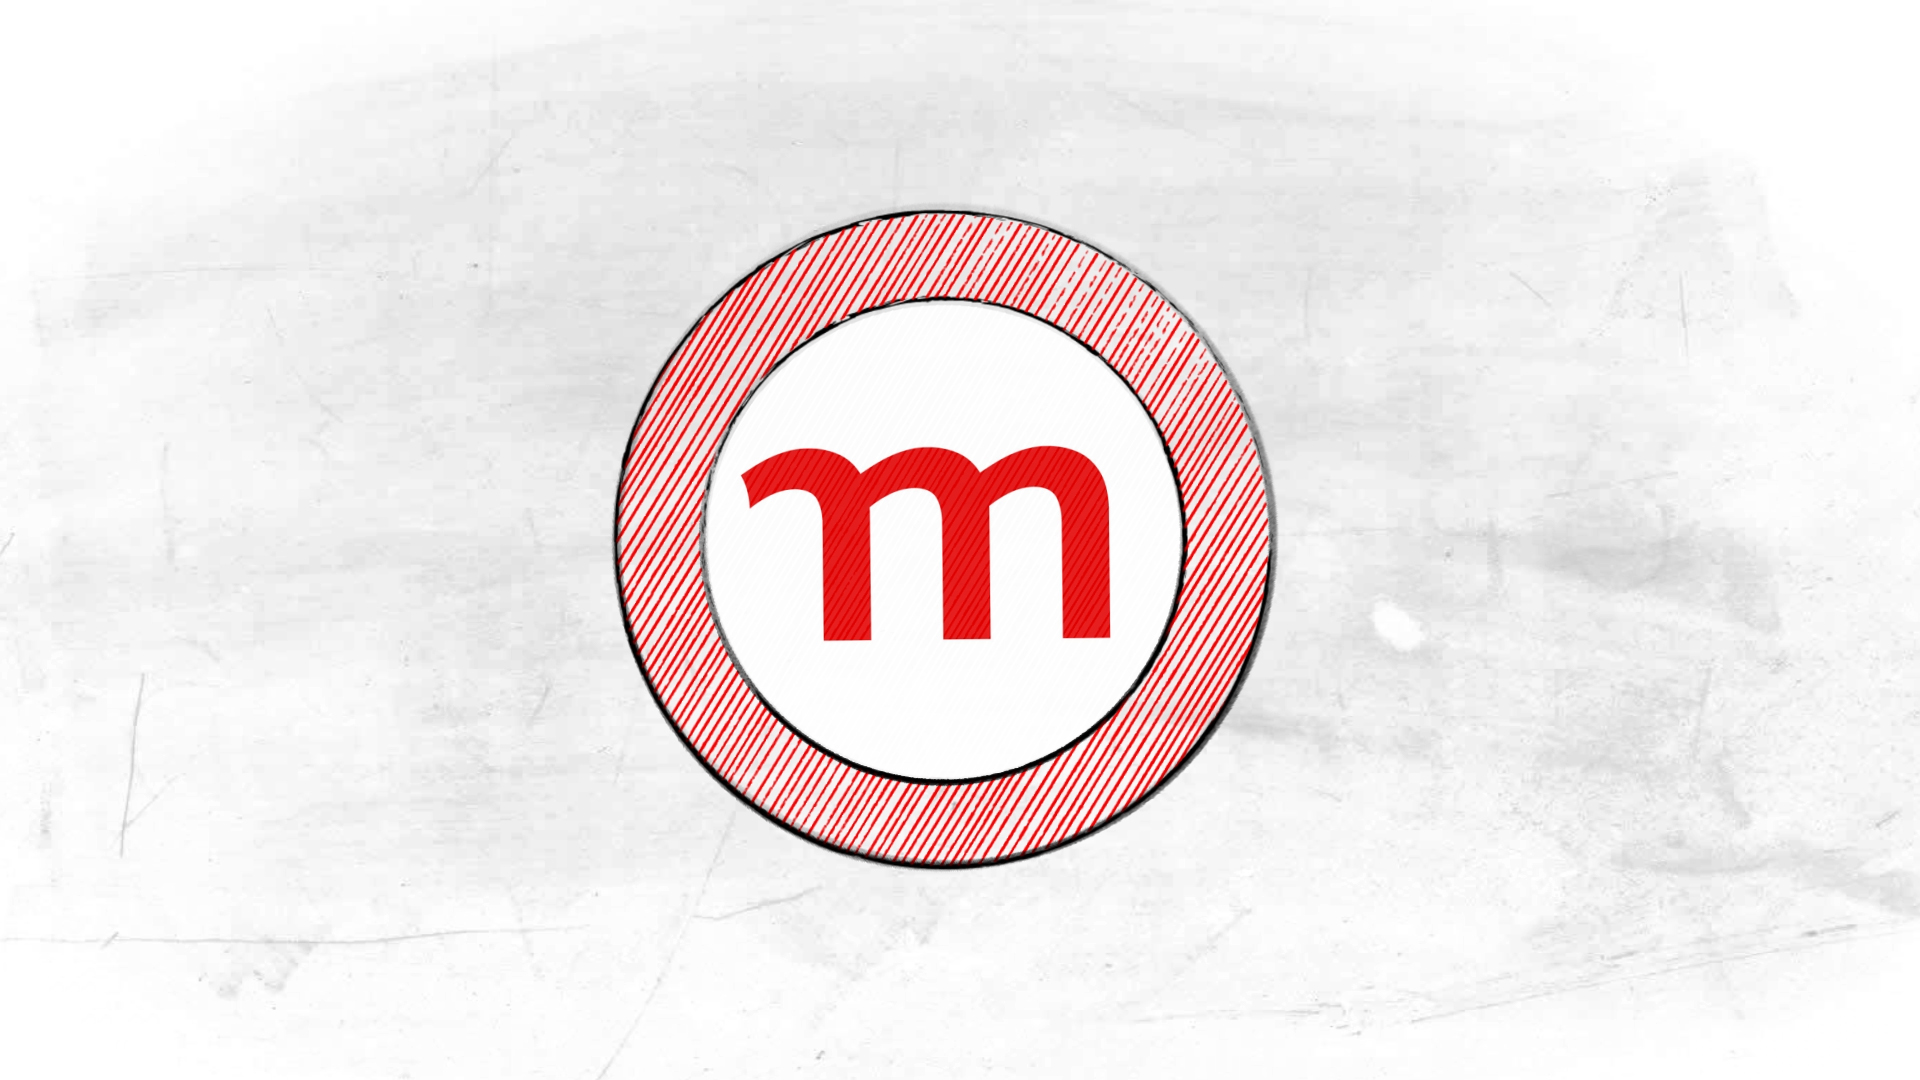 The m of the Momentum logo in a circle